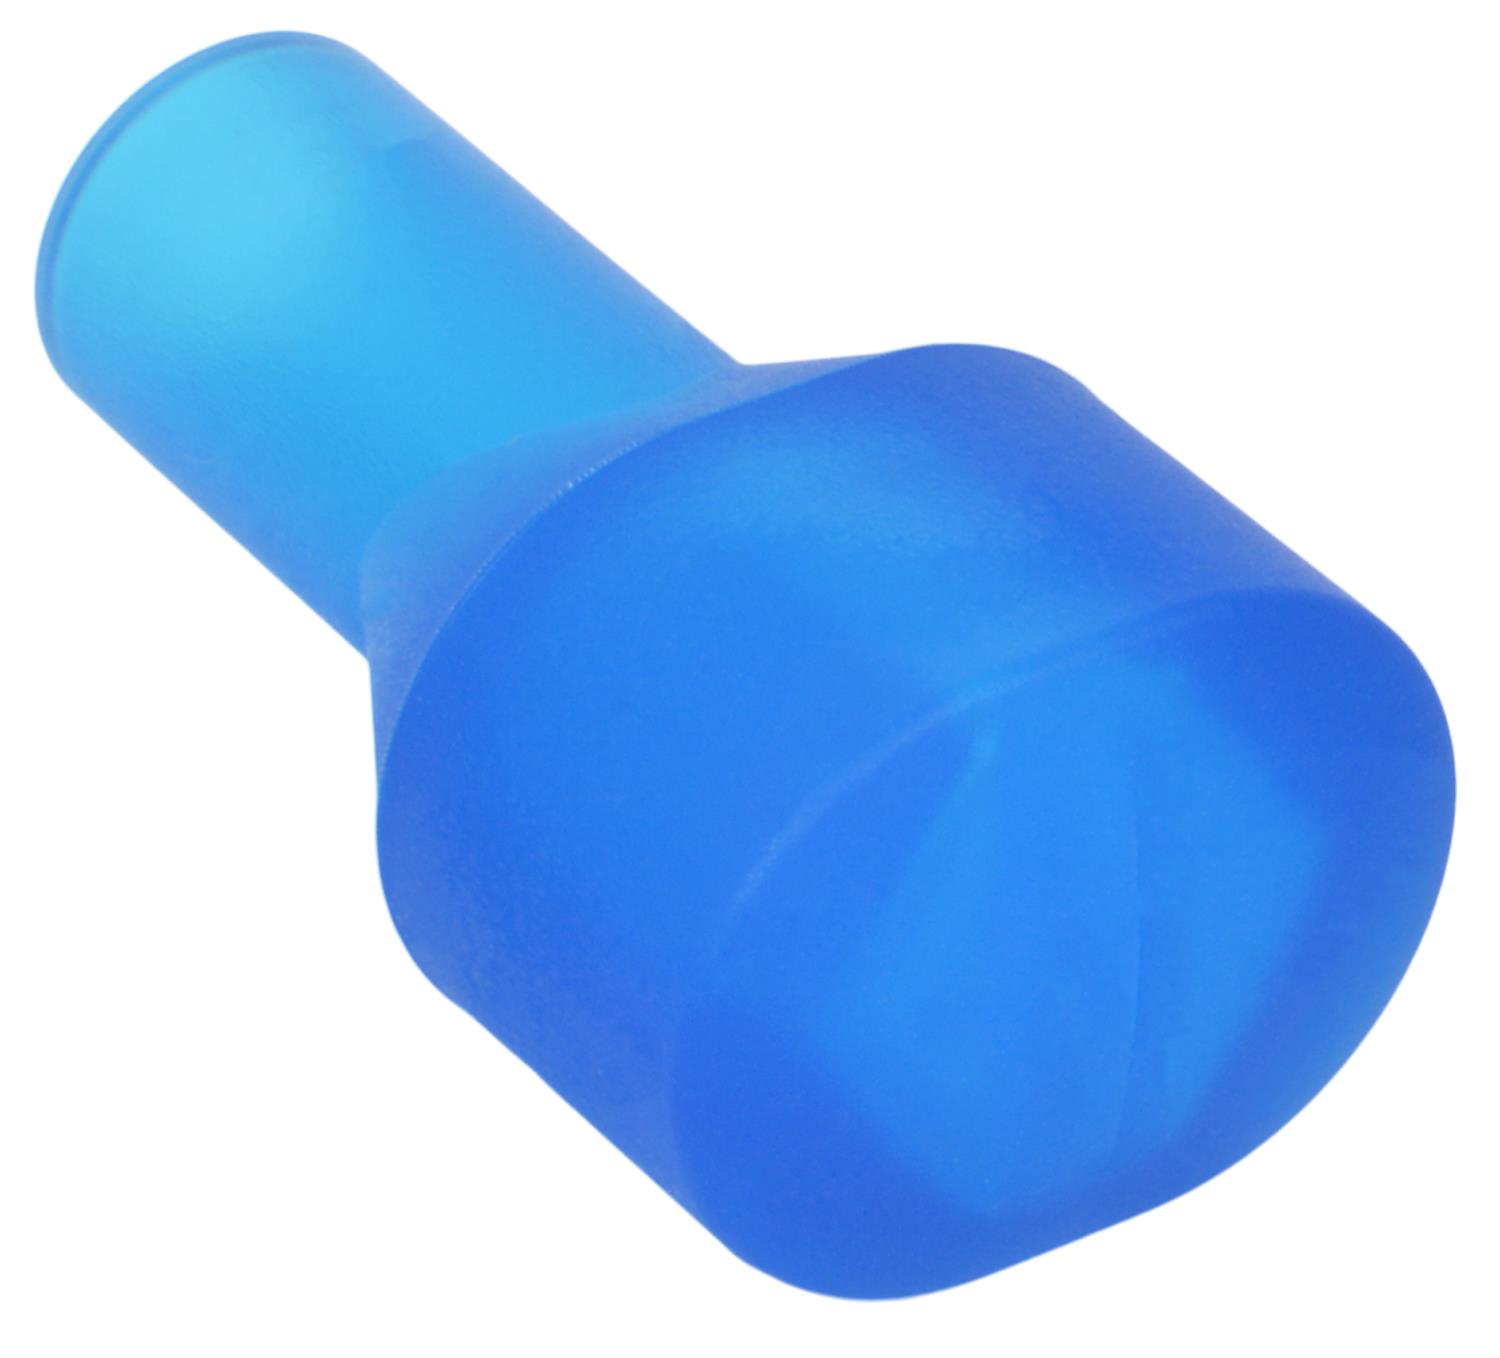 Replacement Bite Valve Fits JOES Drink Bottle Kits